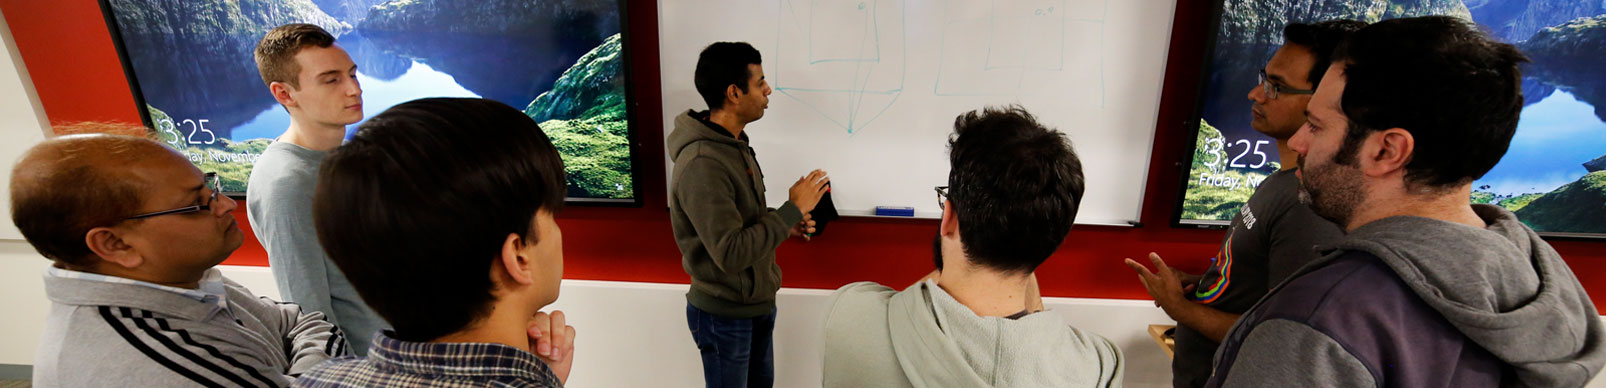 Male students gather around as a classmate develops an idea on a whiteboard